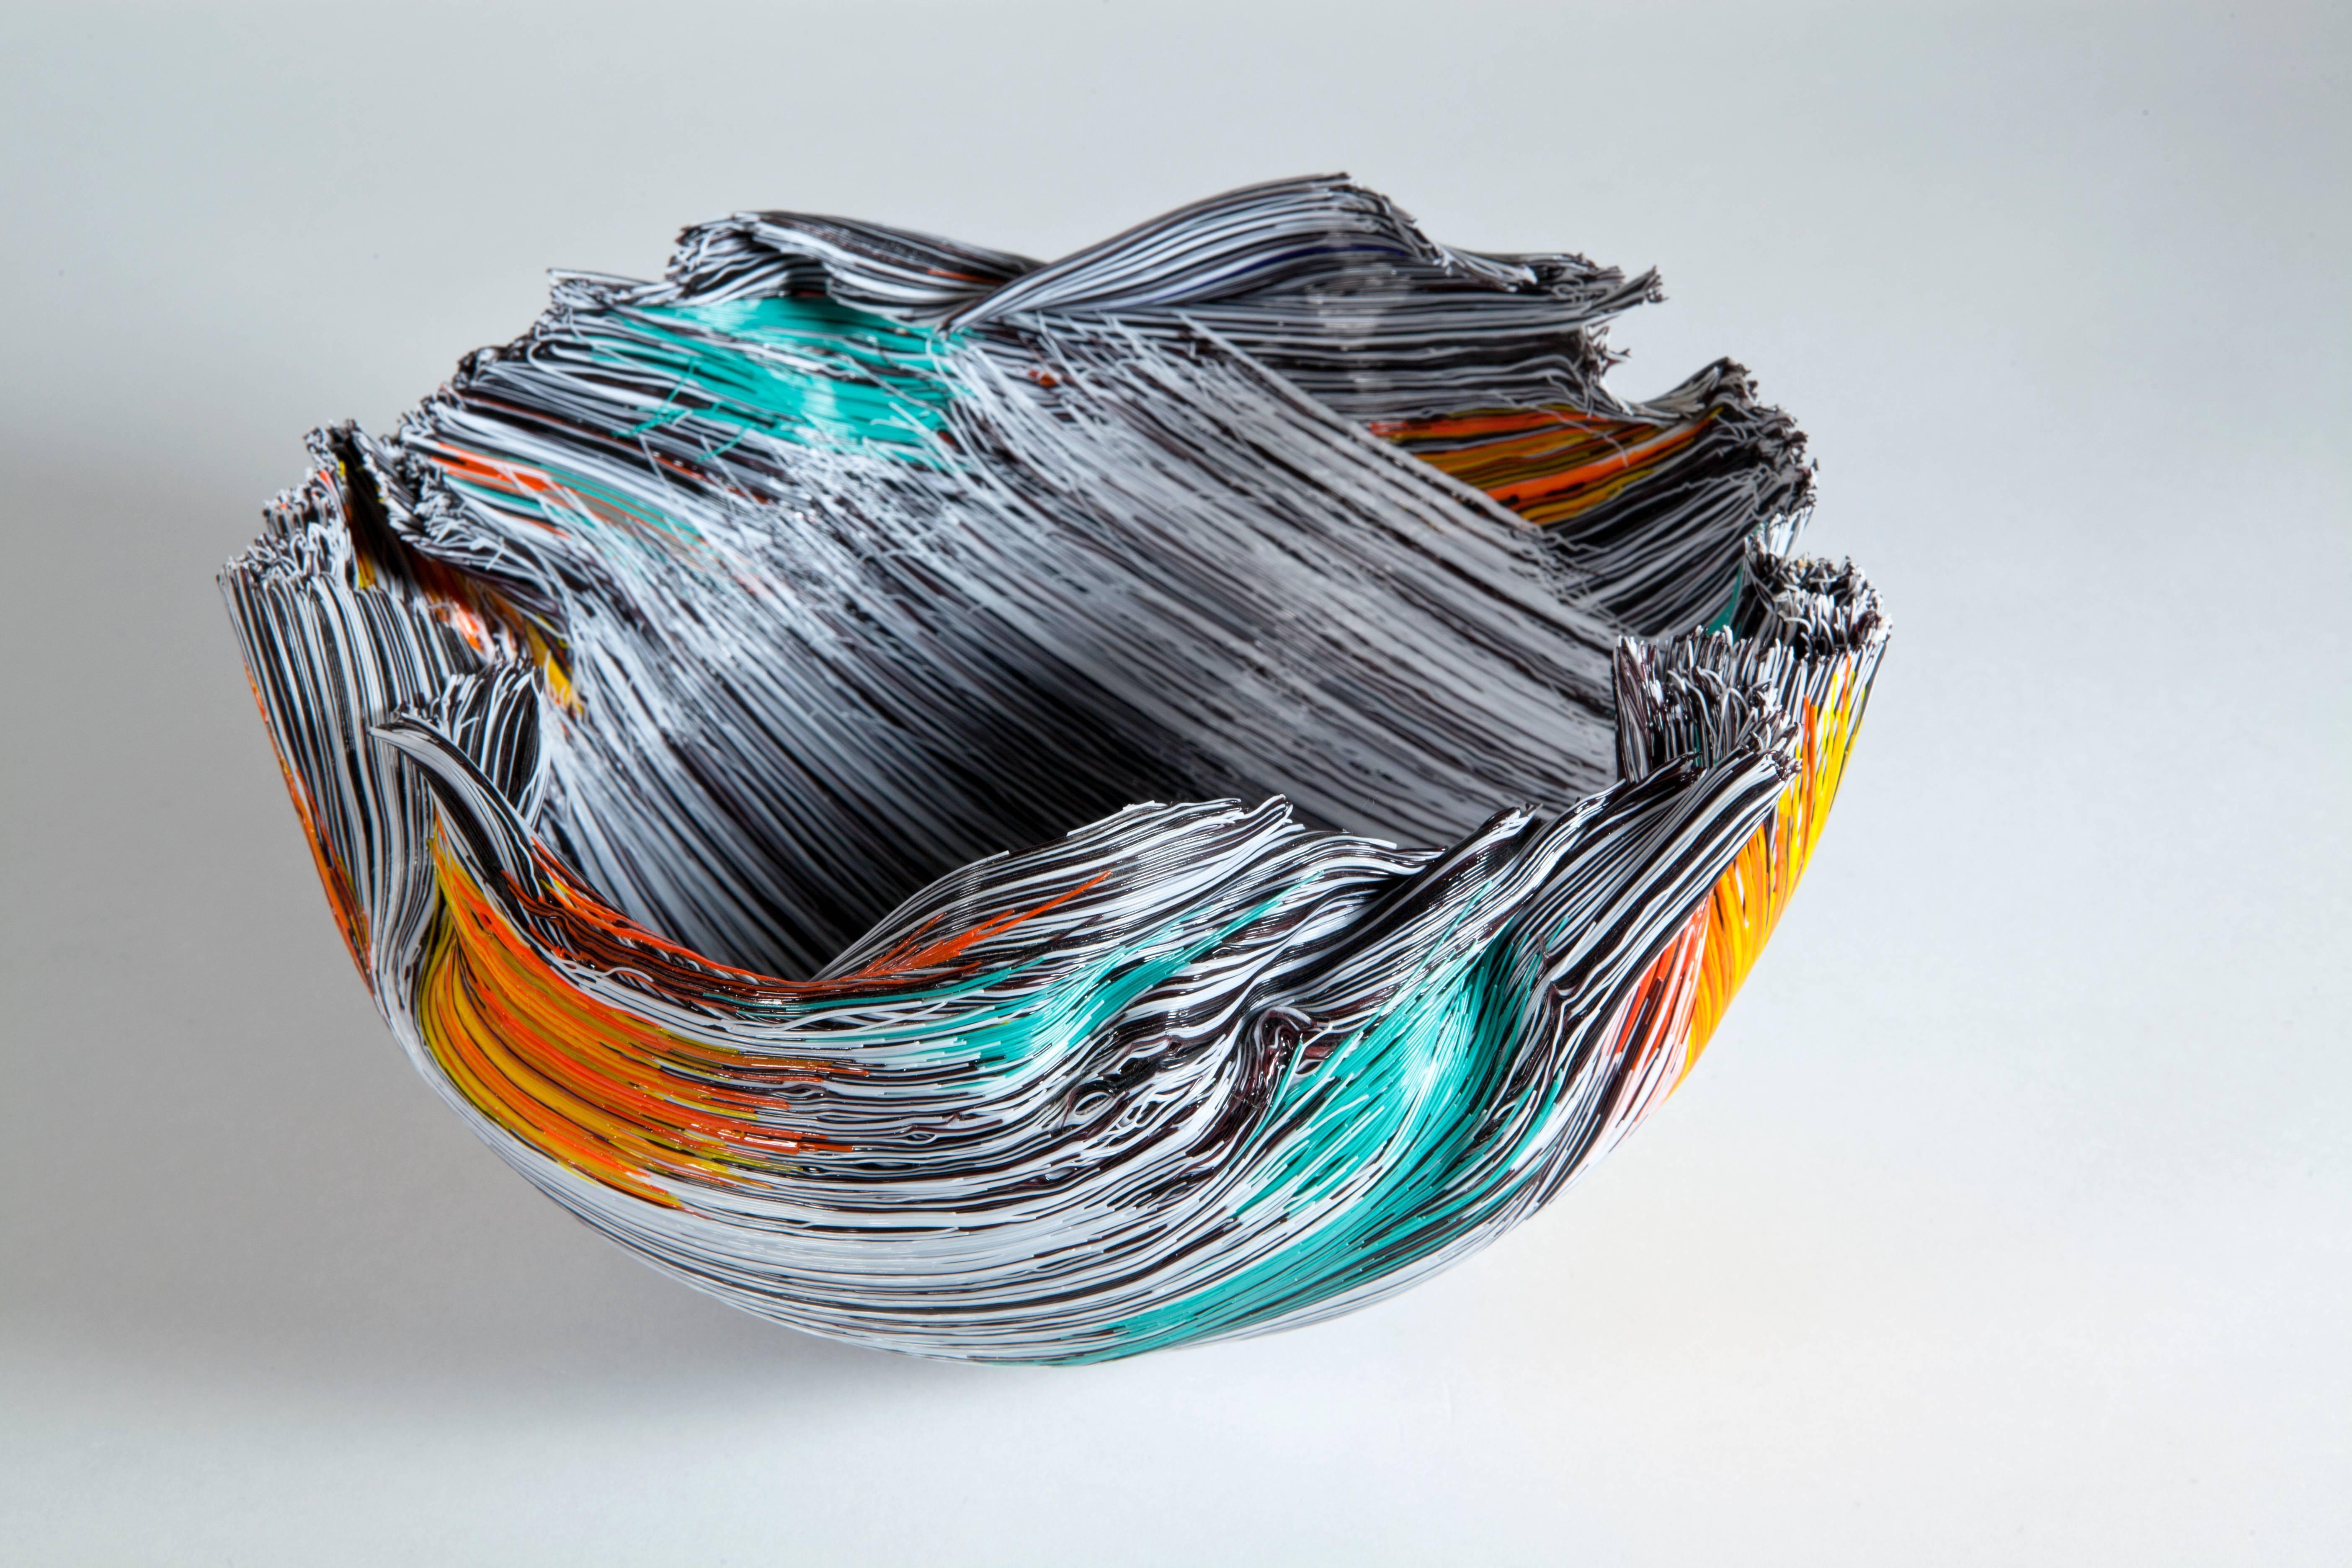 Unique glass bowl by Toots Zynsky. Filet-de-verre fused and thermo formed colored glass. Signed 'Z' with a glass thread.

This glass sculpture is one of the first pieces Zynsky made with her distinctive 'filet-de-verre' technique. This bowl is made